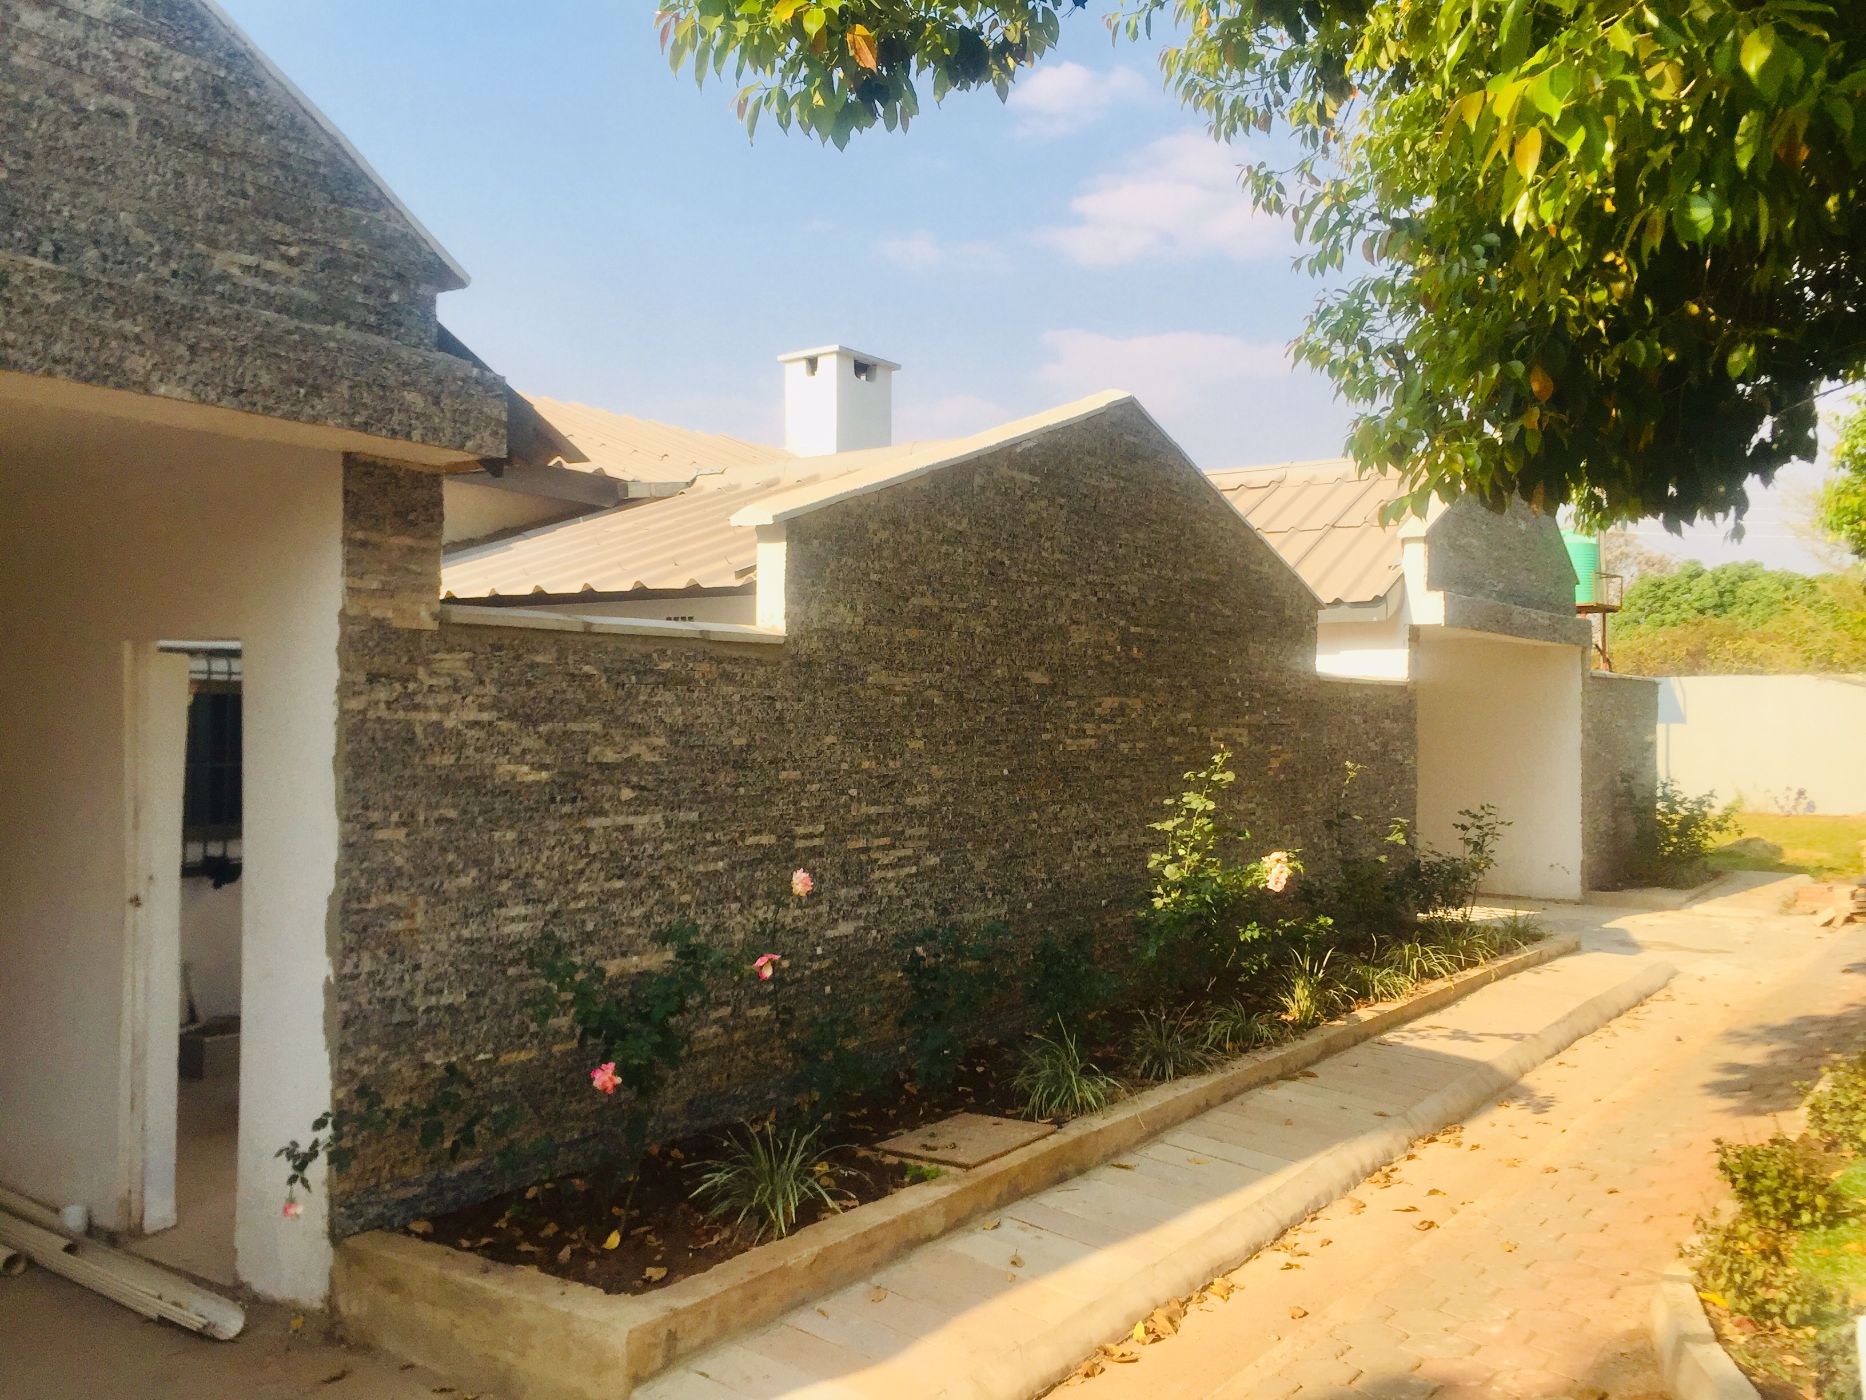 4 bedroom house to rent in Kalundu (Zambia)